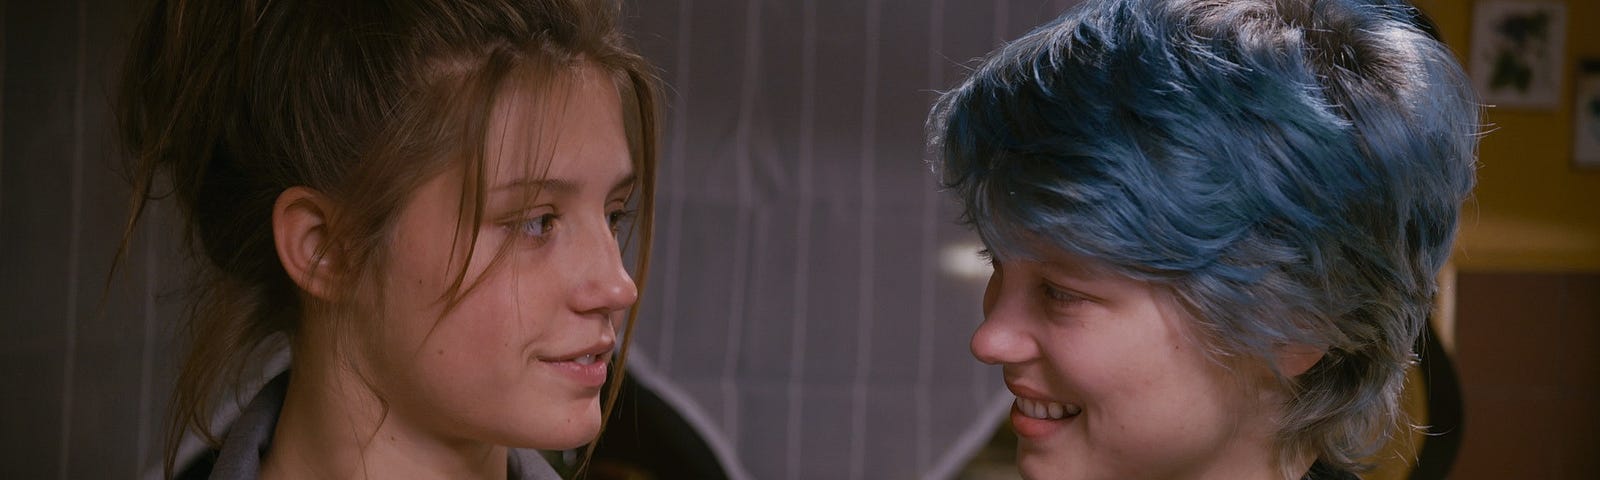 Blue Is The Warmest Color" Is One Of The Best Coming-Of-Age Stories In...